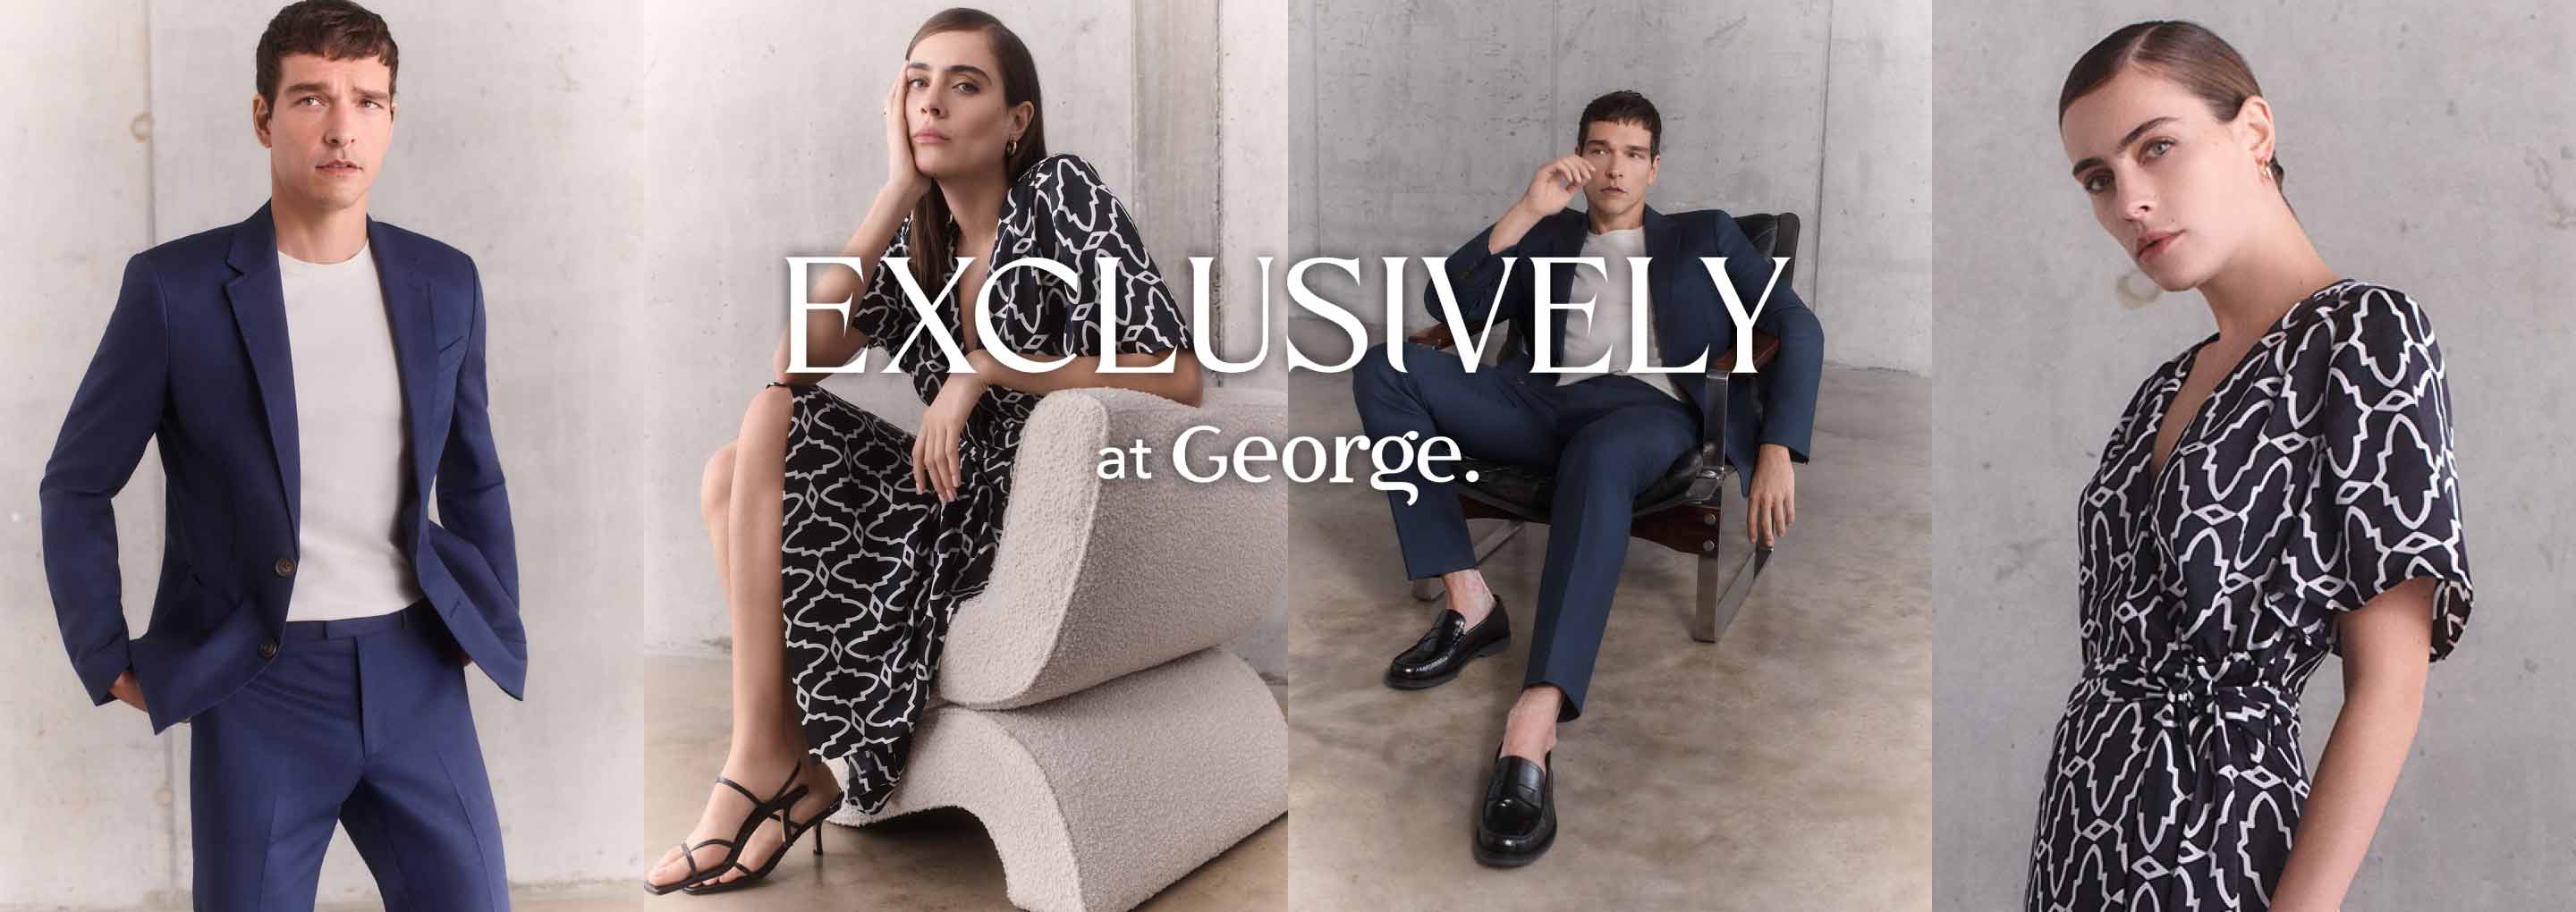 EXCLUSIVELY AT GEORGE. A woman wearing a monochrome dress. A man ...